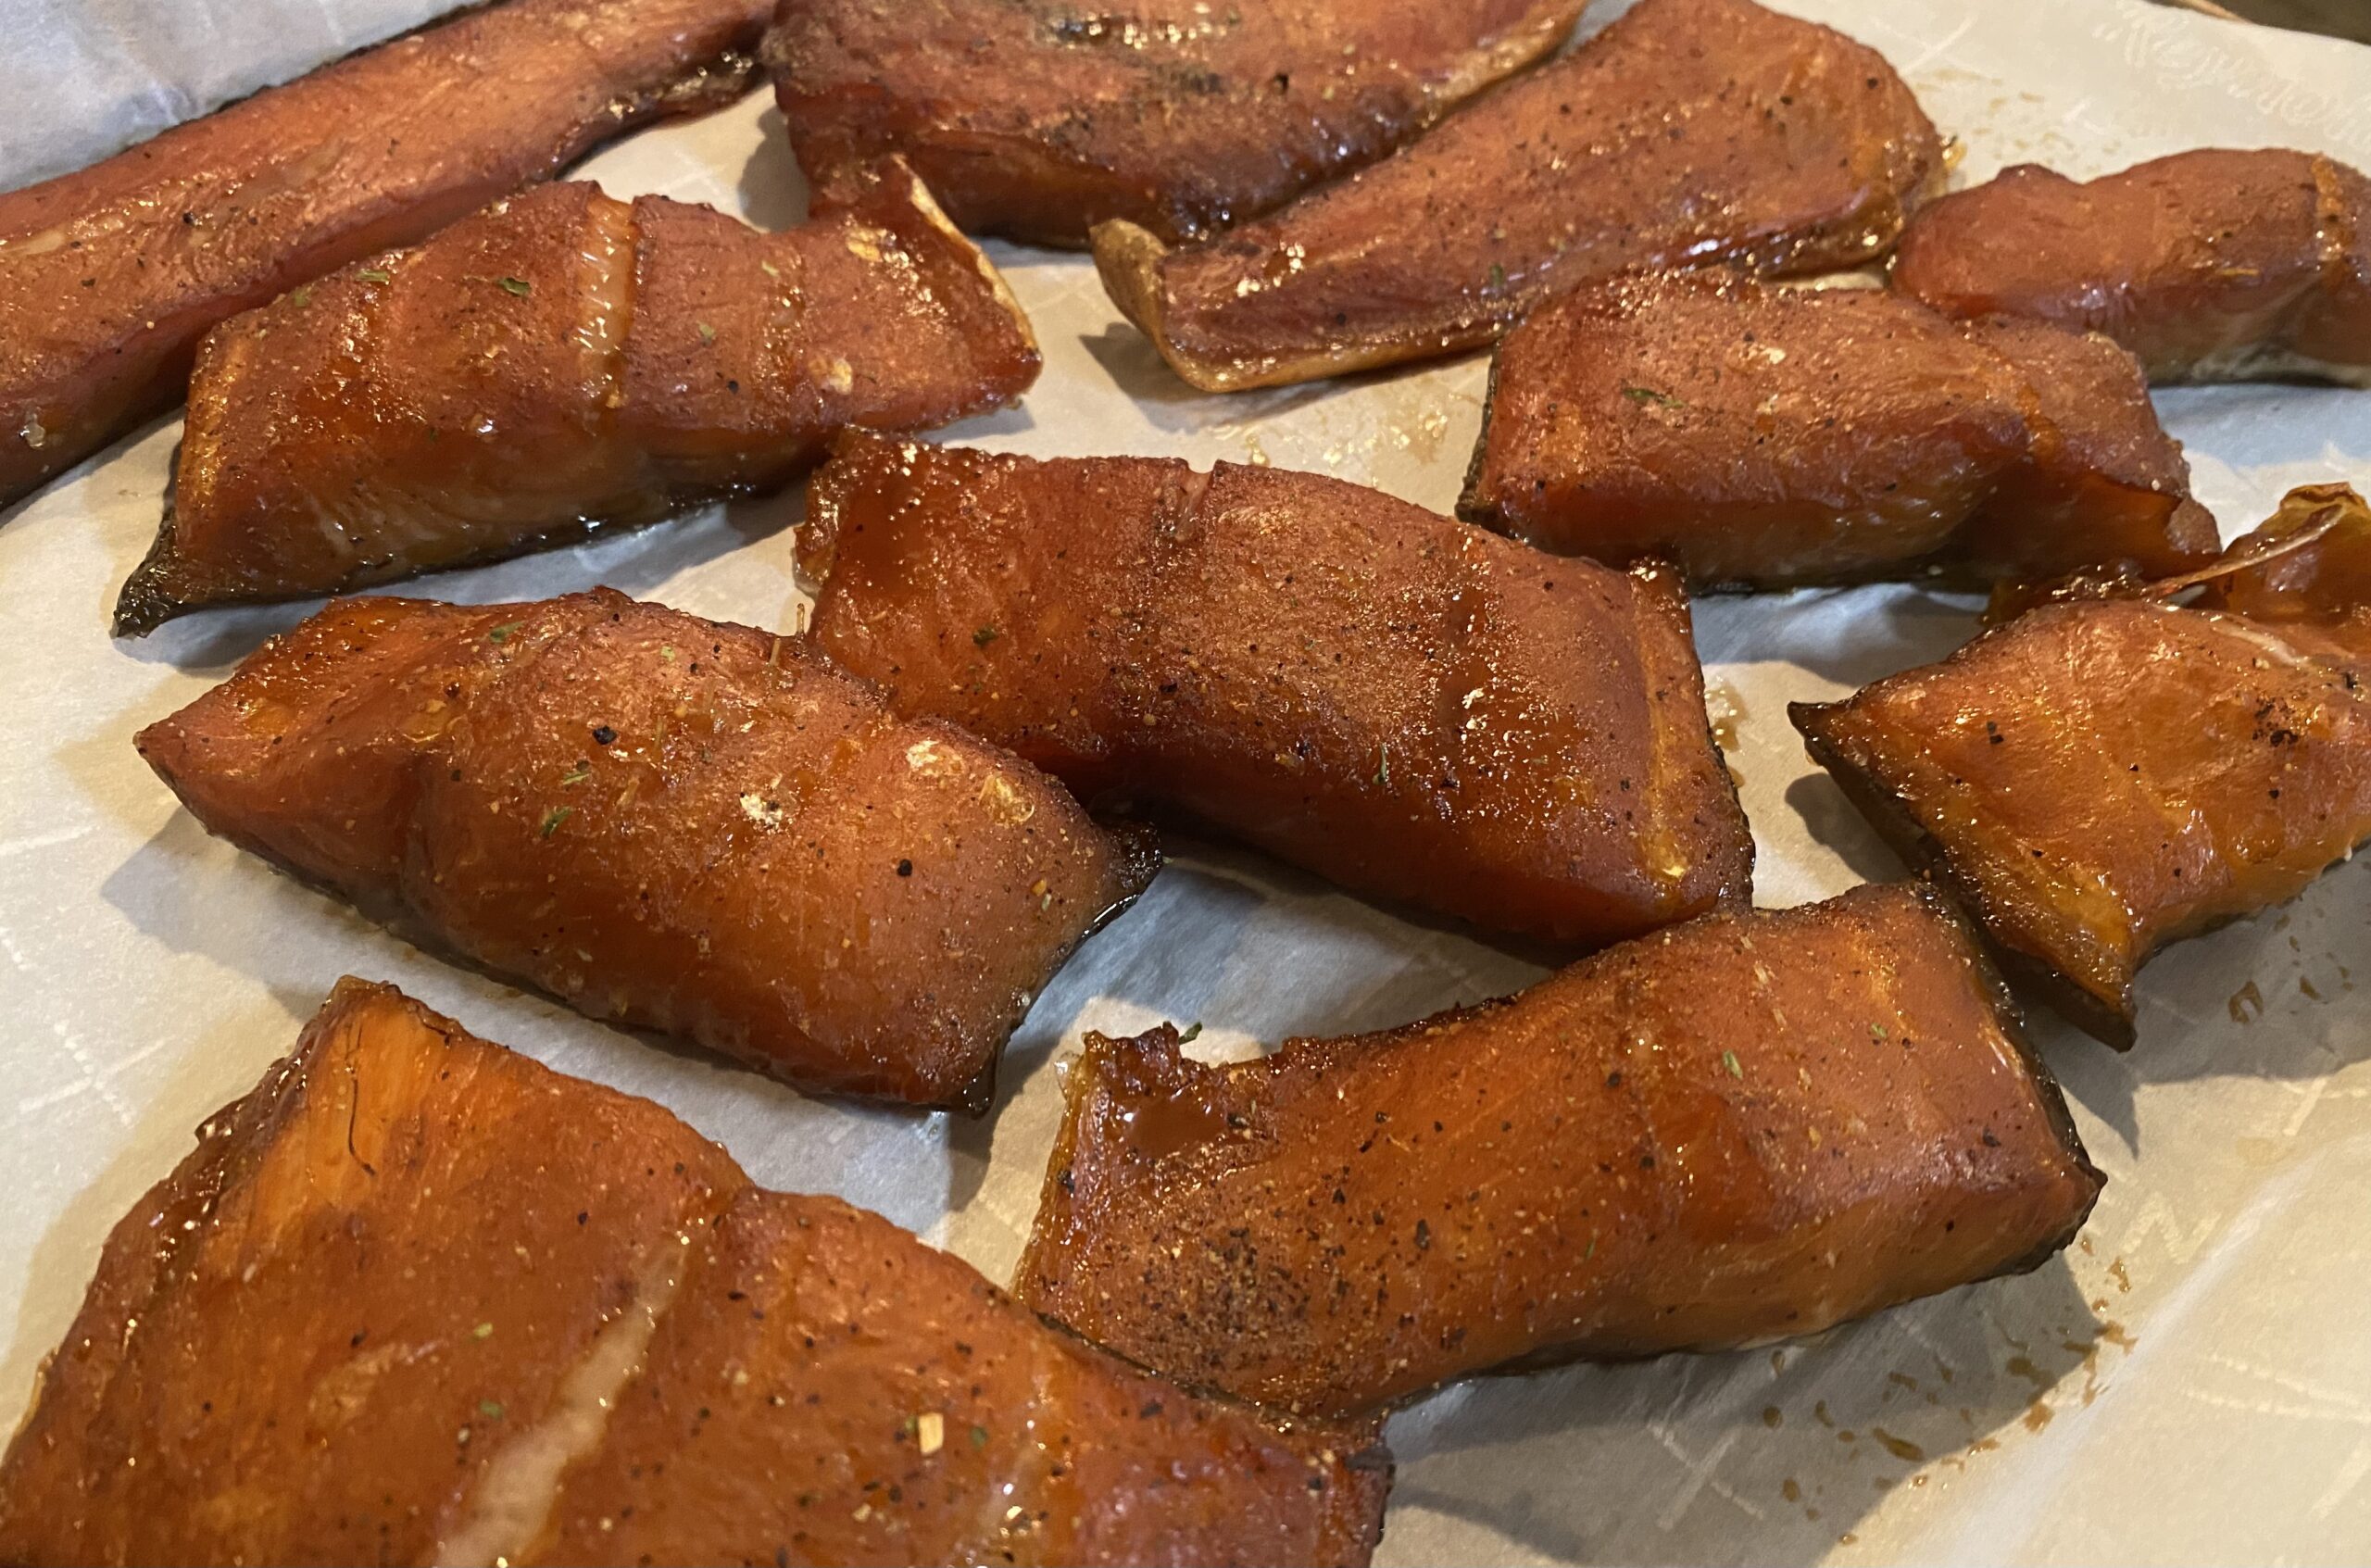 Brown sugar-cured smoked salmon portions and tails